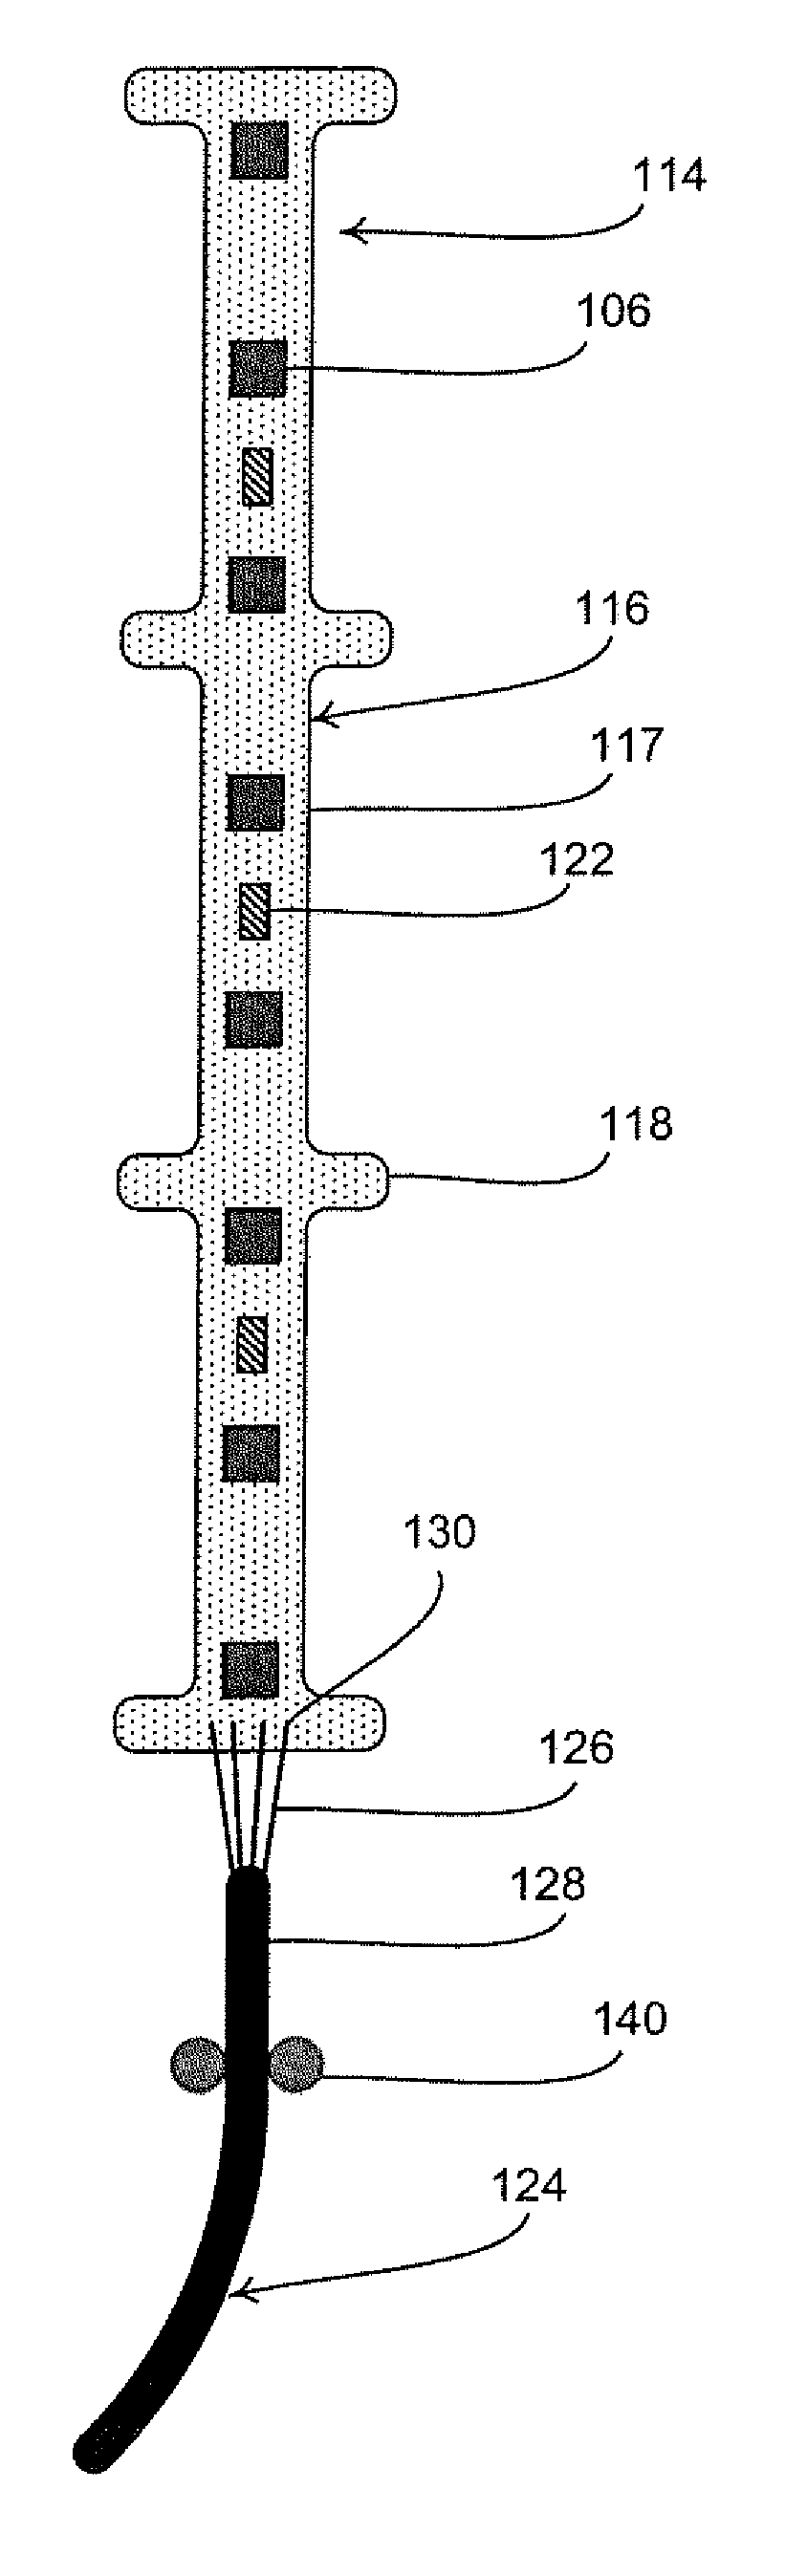 Flexible LED light strip for a bicycle and method for making the same